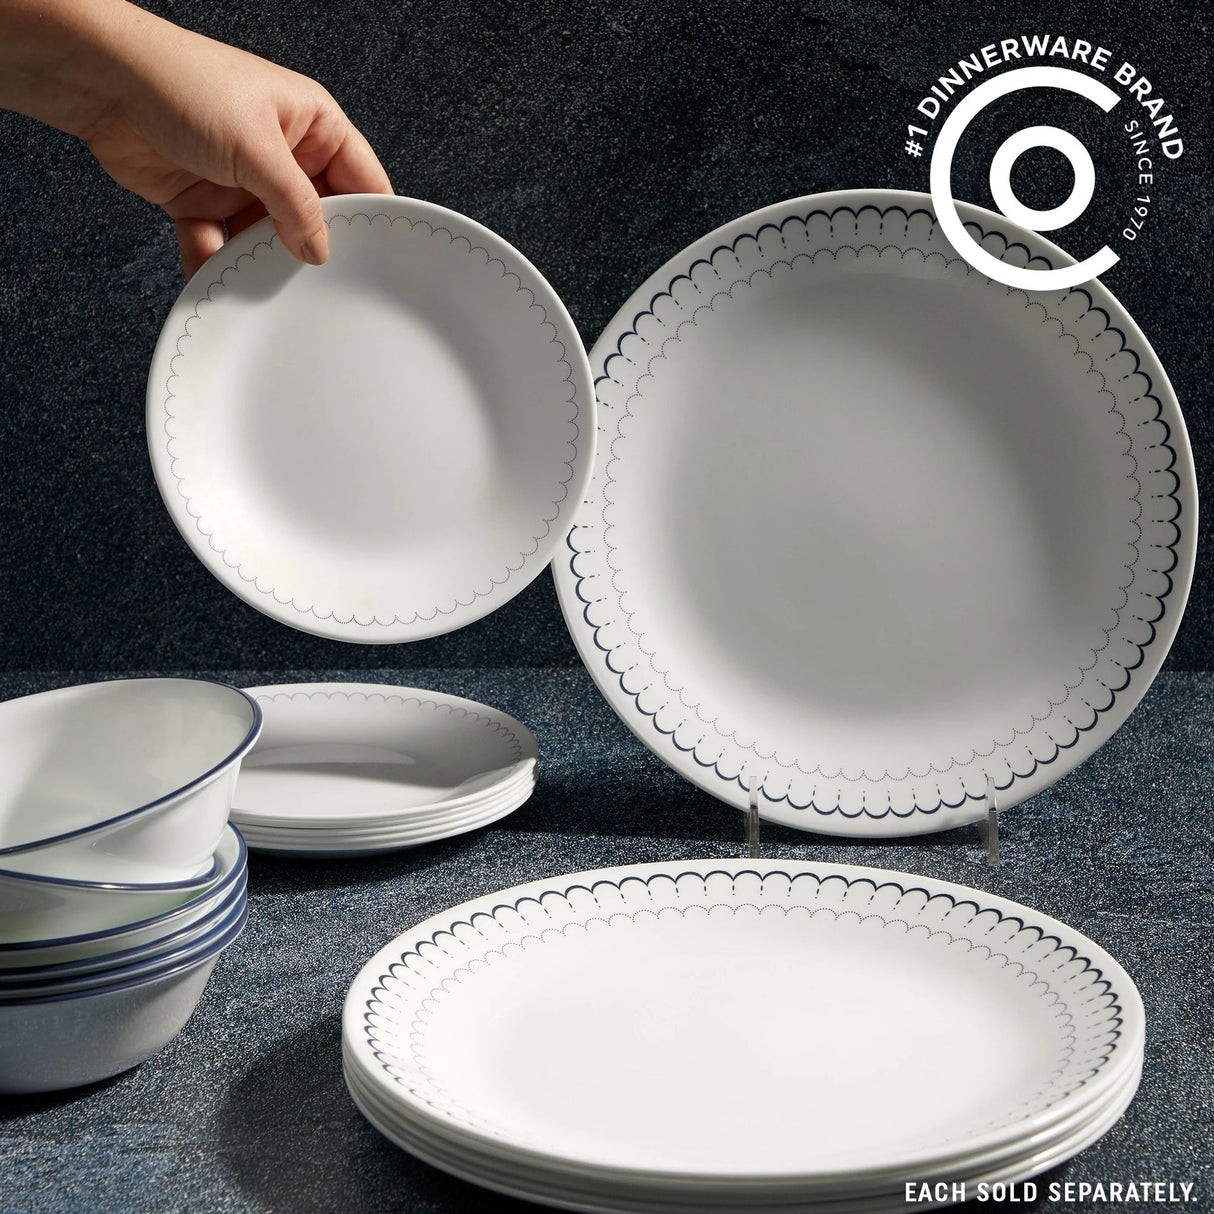  Caspian Lace set on the tabletop with text #1 dinnerware brand